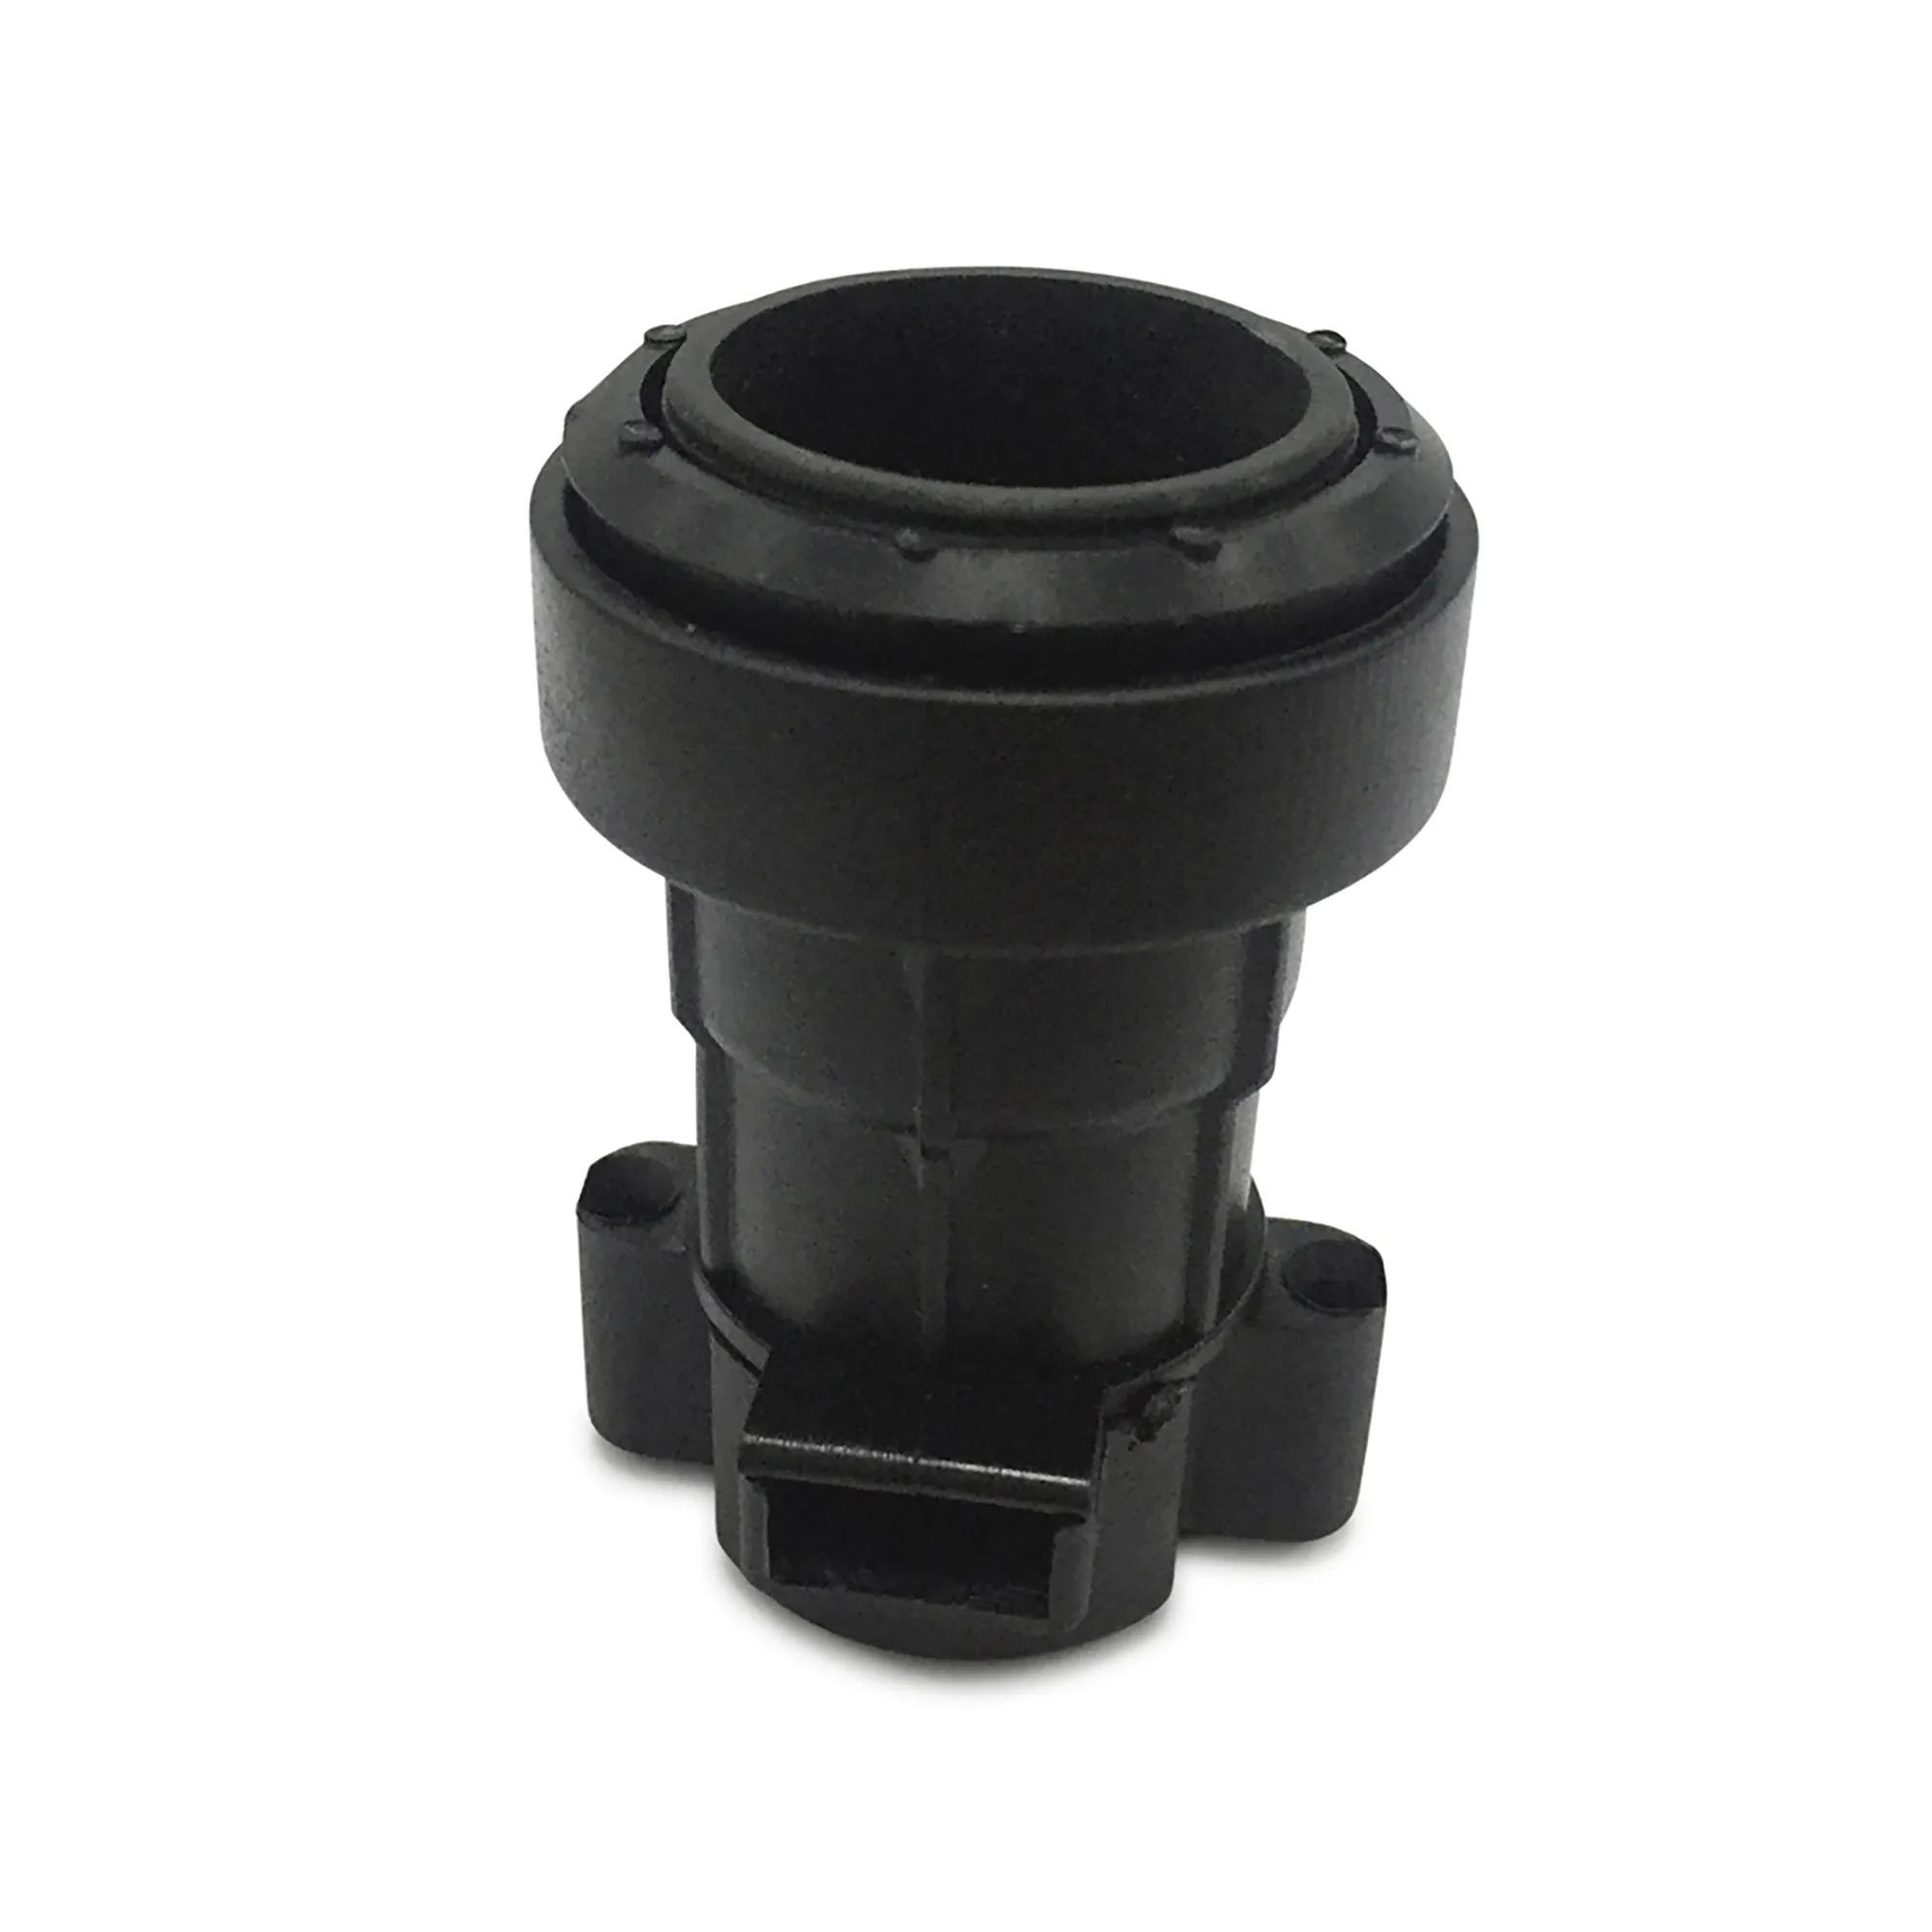 D0240  Fosta E27 Lamp Holder Suitable For D0239 Cable IP65 Black